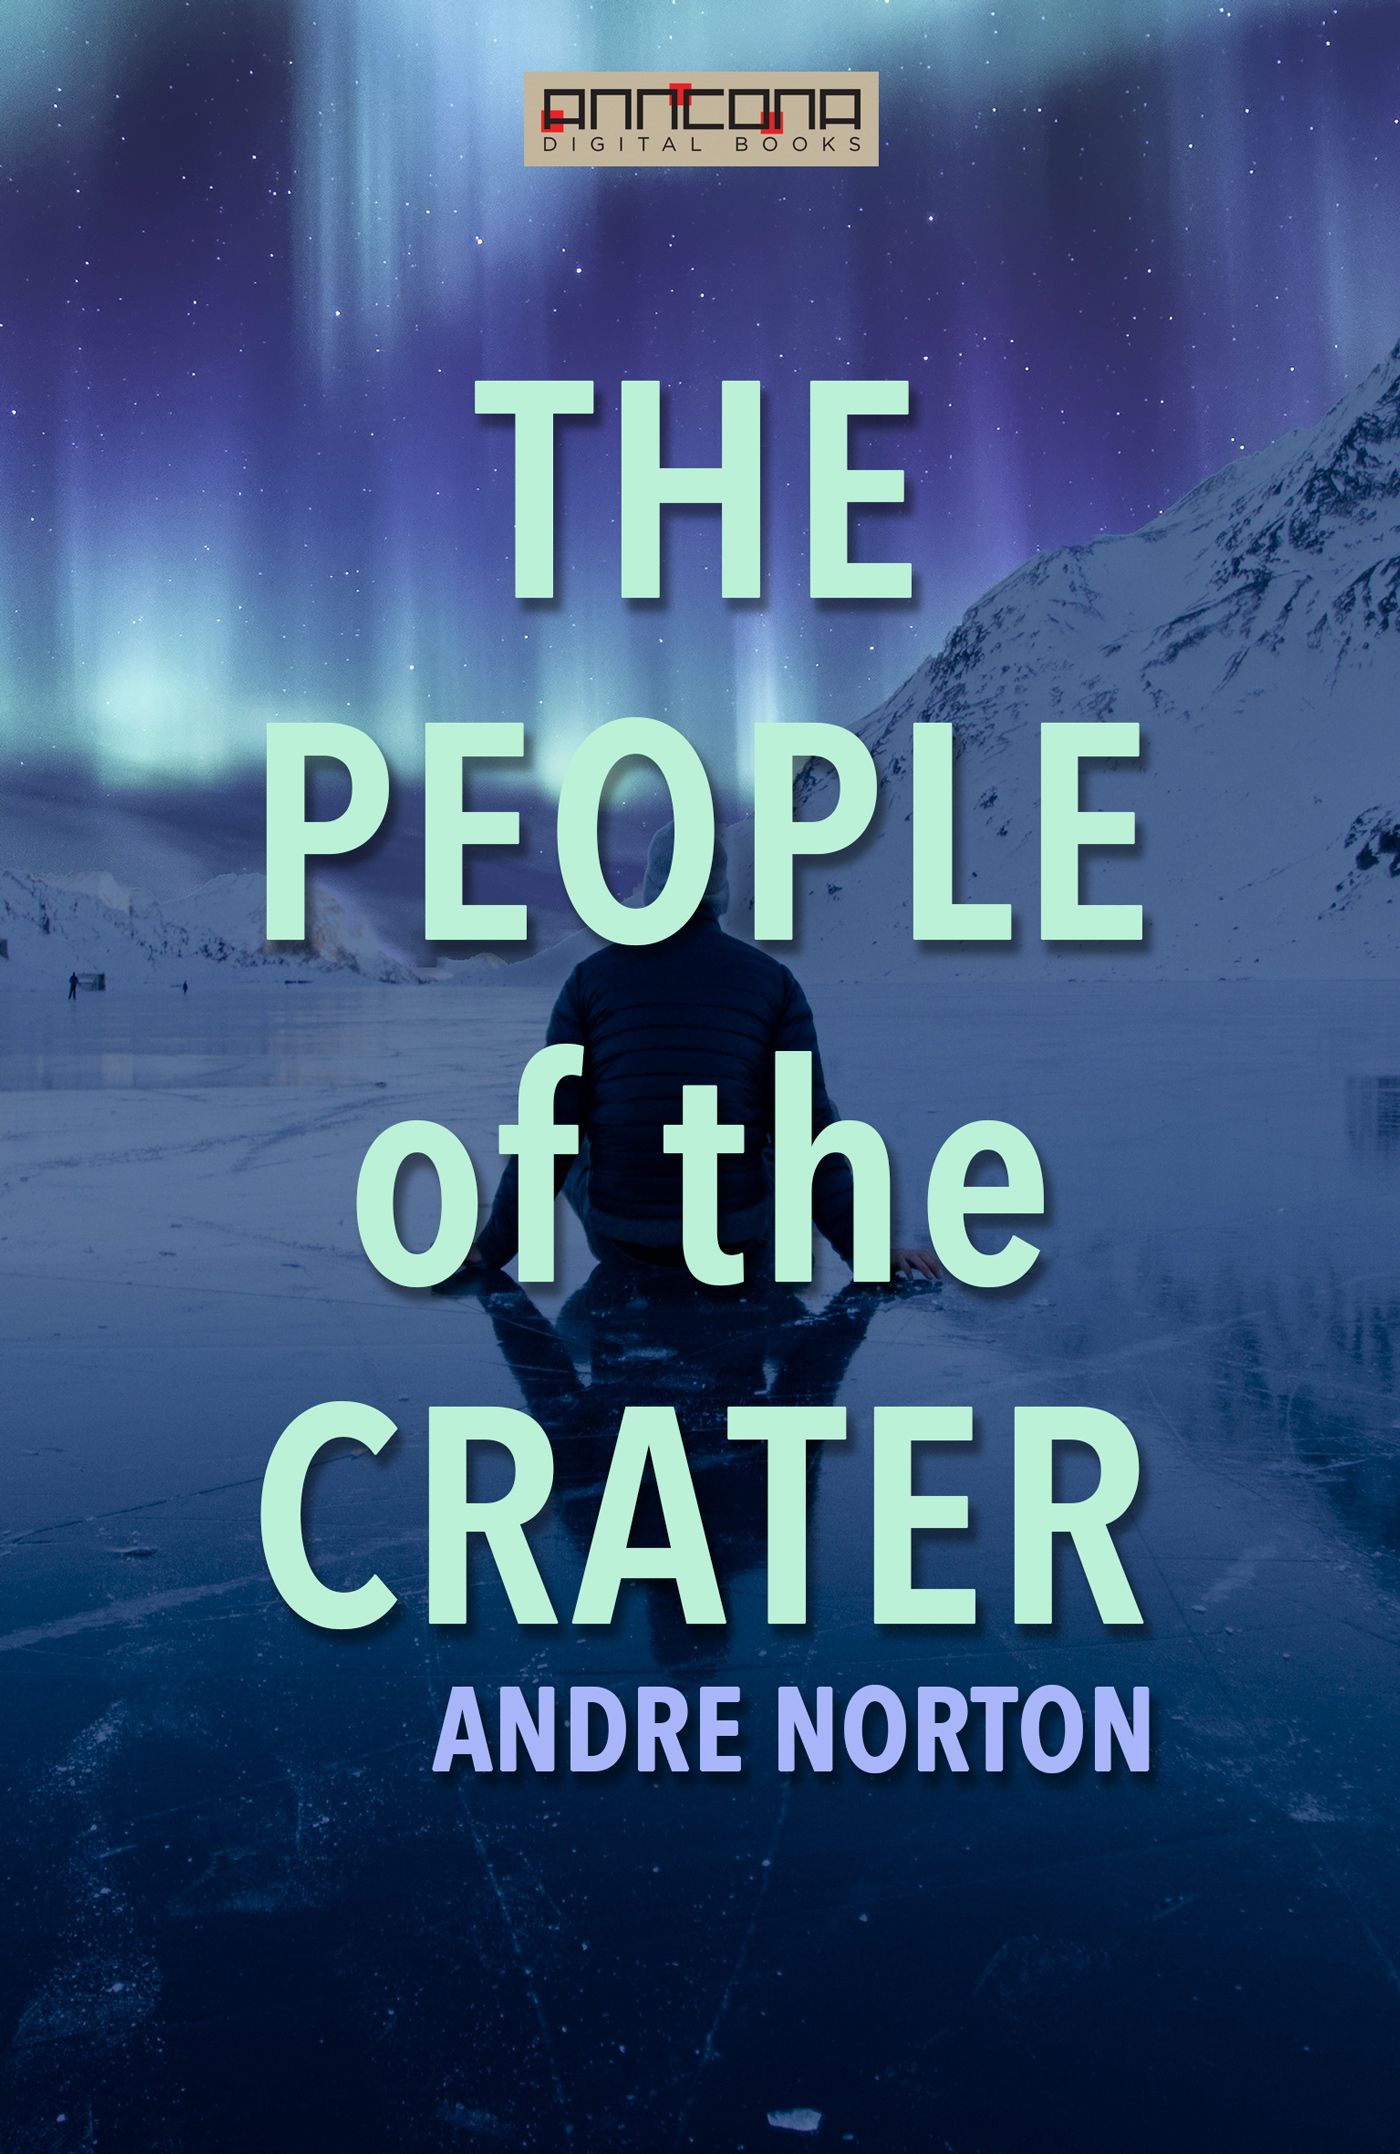 The People of the Crater, e-bog af Andre Norton